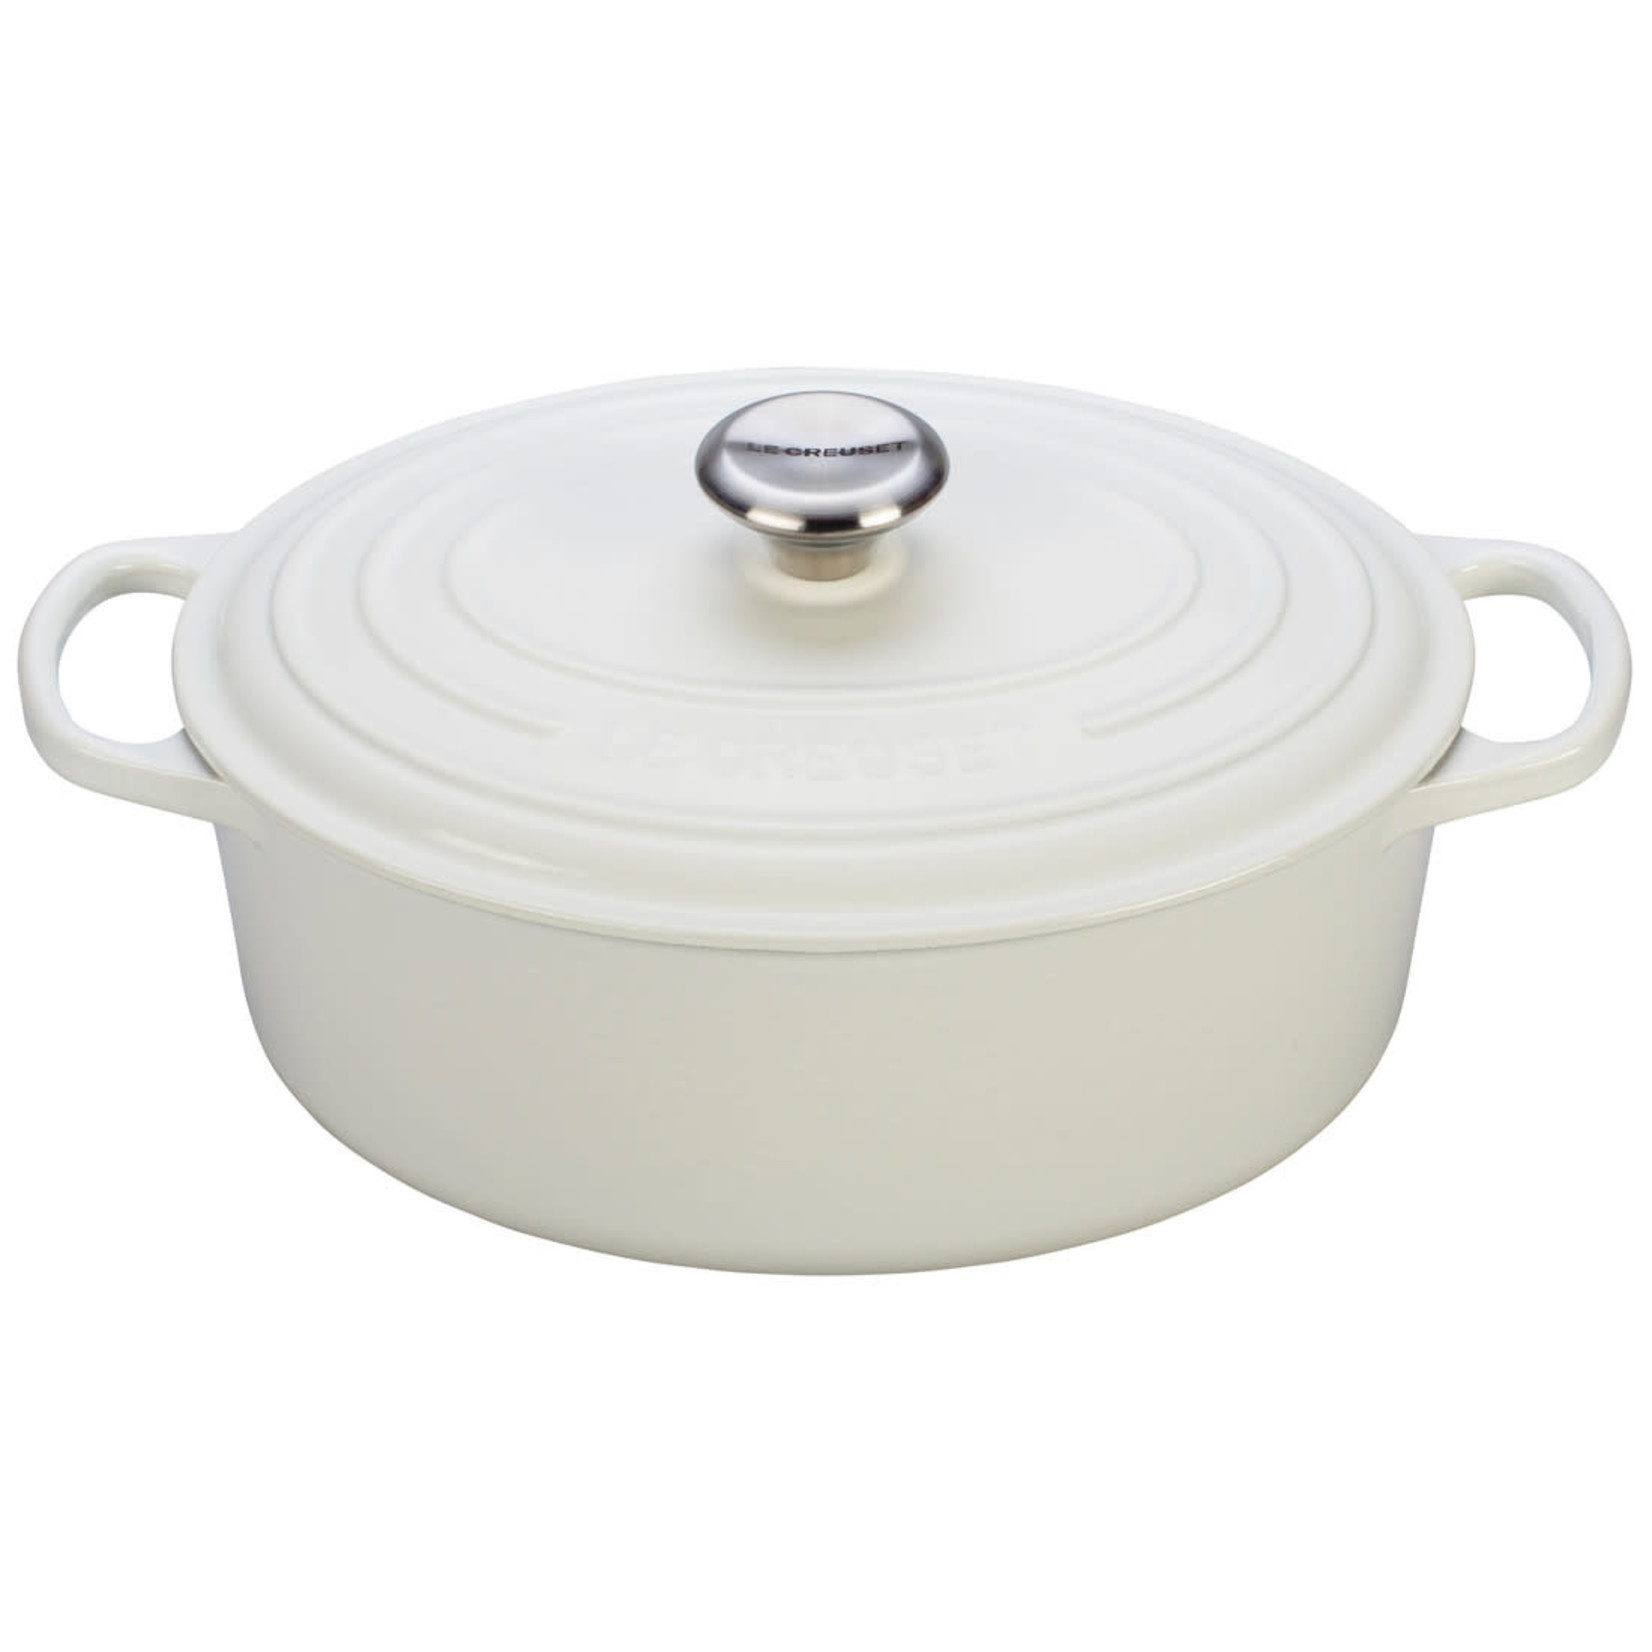 LE CREUSET LE CREUSET Oval French Oven 4.7L